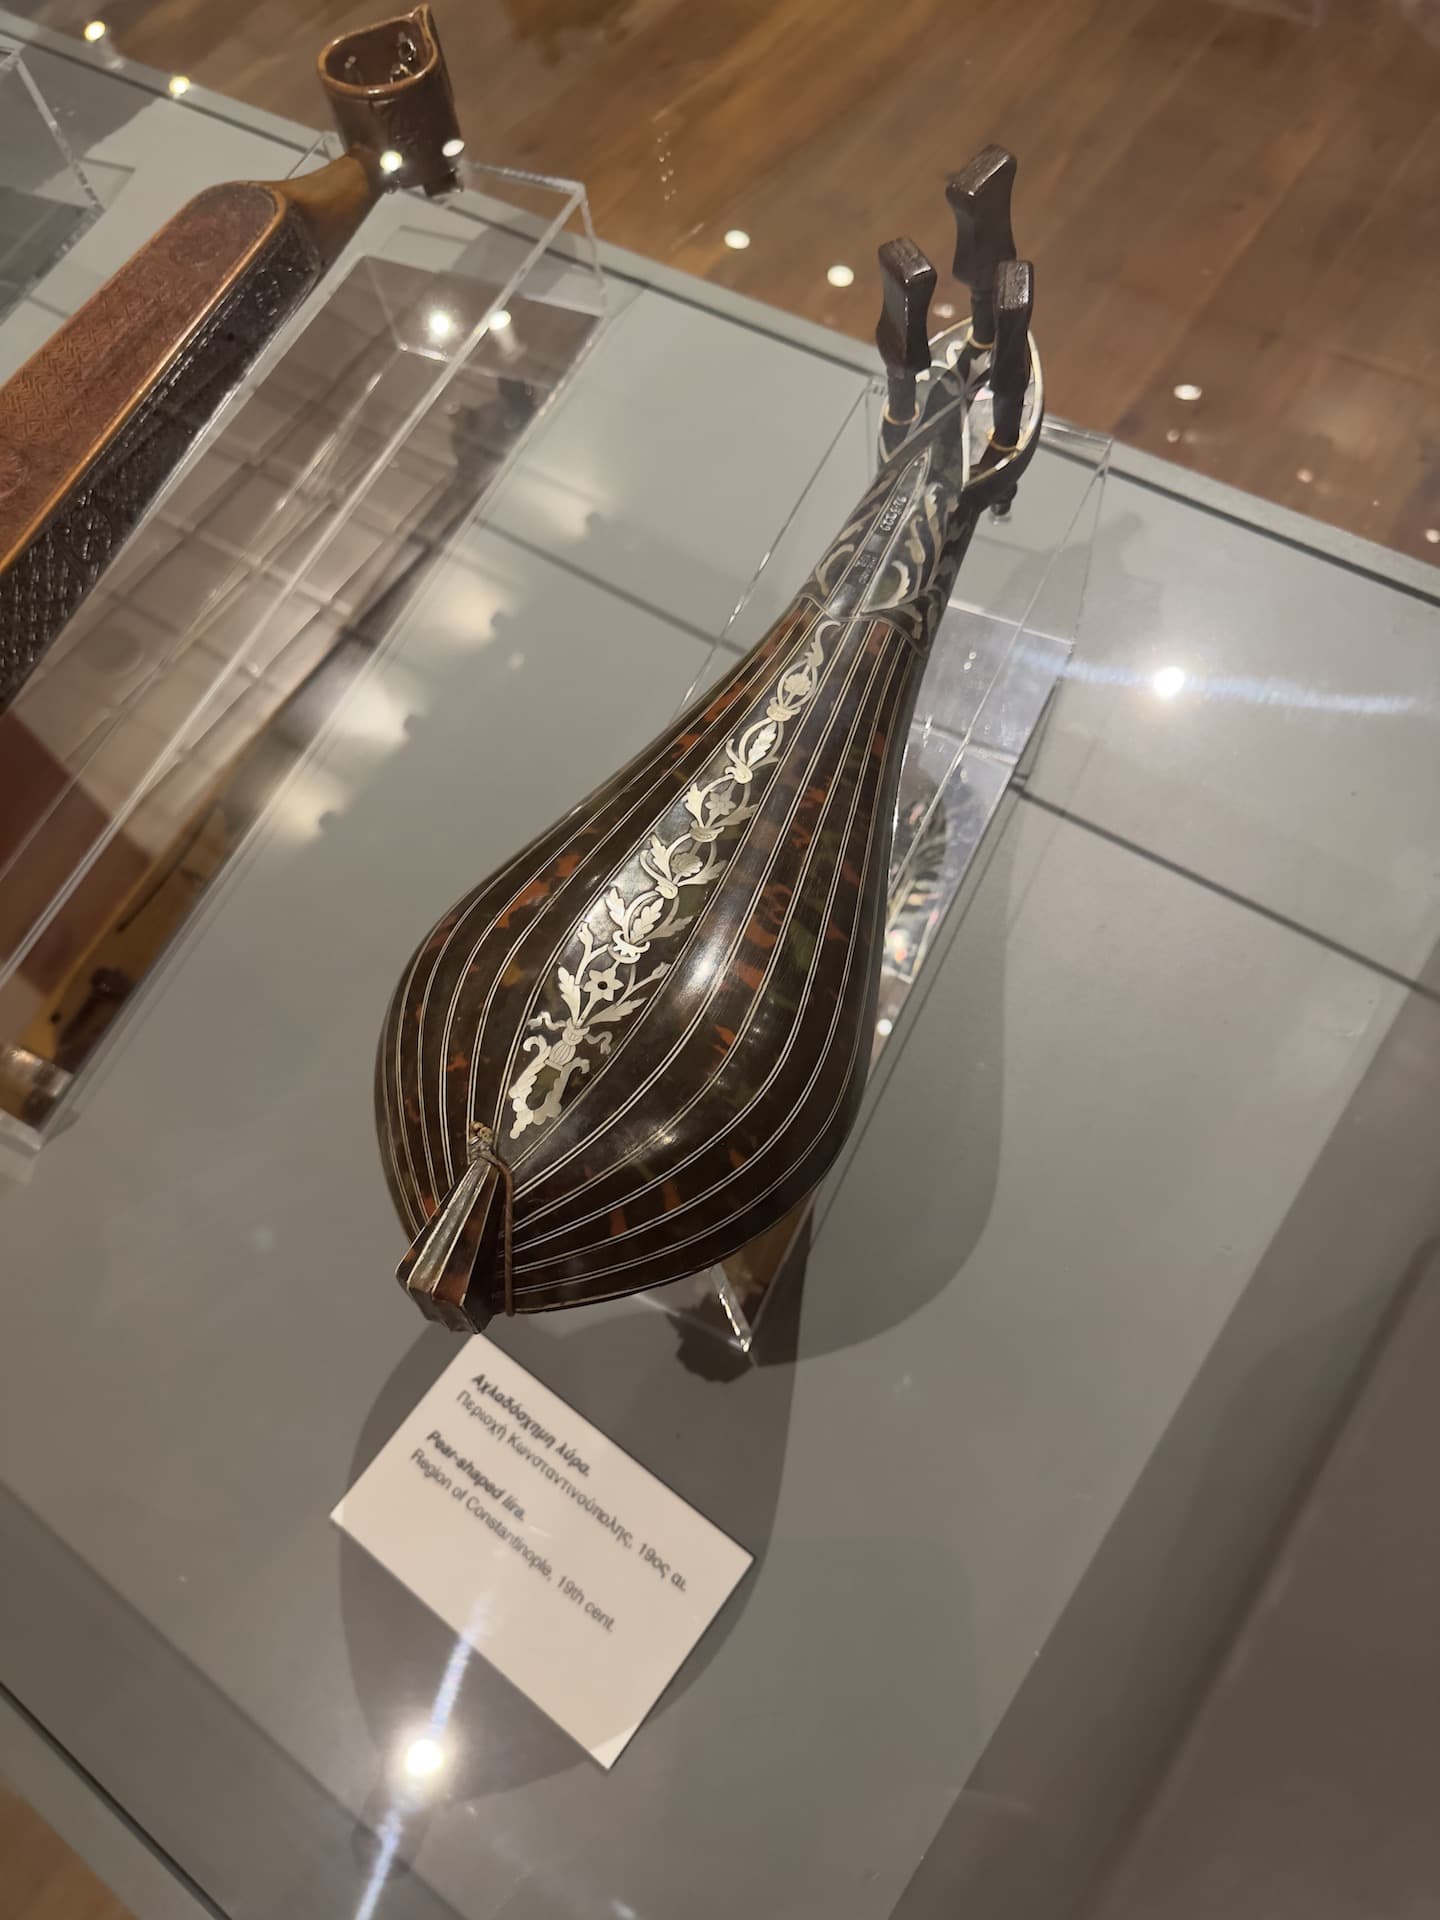 Pear-shaped lira, Constantinople region, 19th century at the Museum of Greek Folk Musical Instruments in Athens, Greece